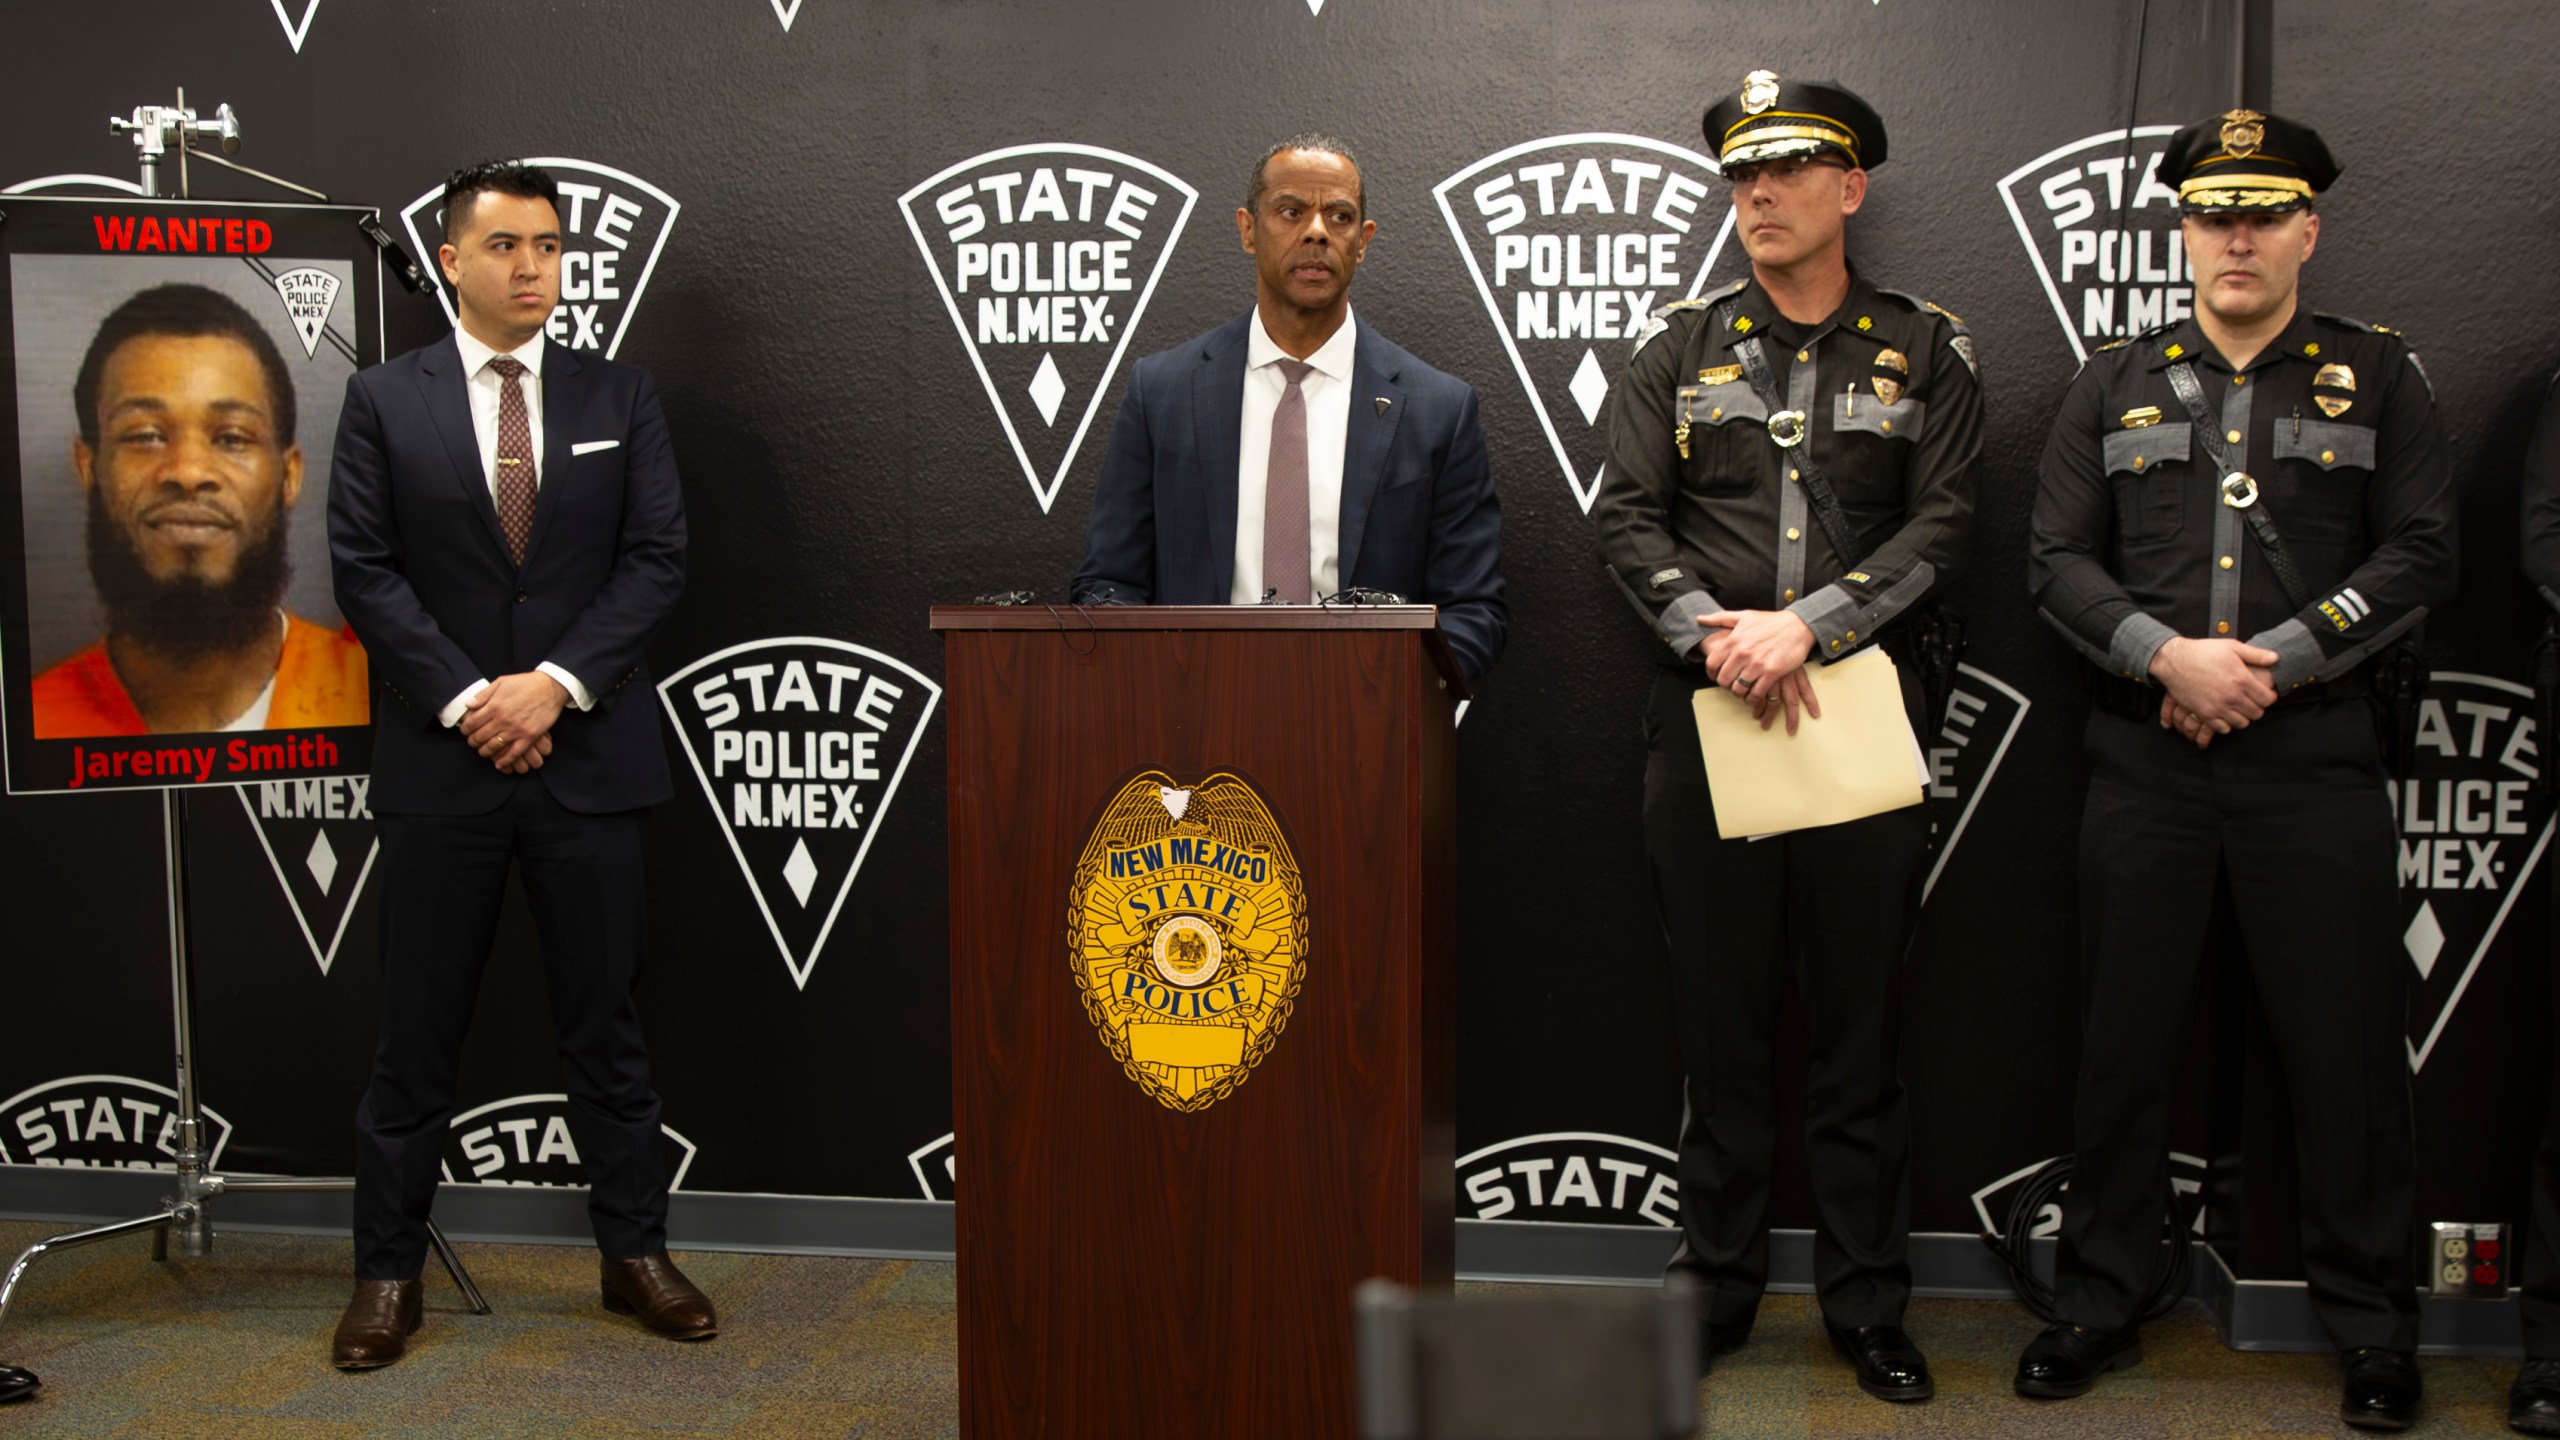 A portrait of Jaremy Smith is displayed beside U.S. Attorney for New Mexico Alexander Uballez, left, on Saturday, March 16, 2024, as Public Safety Secretary Jason Bowie gives a briefing following the death of New Mexico State Police officer Justin Hare, in Albuquerque, N.M. The suspect in the shooting death of a state police officer has been captured in a Sunday-morning, March 17, confrontation on the west side of Albuquerque, the New Mexico State Police announced Sunday. (Jon Austria/The Albuquerque Journal via AP)